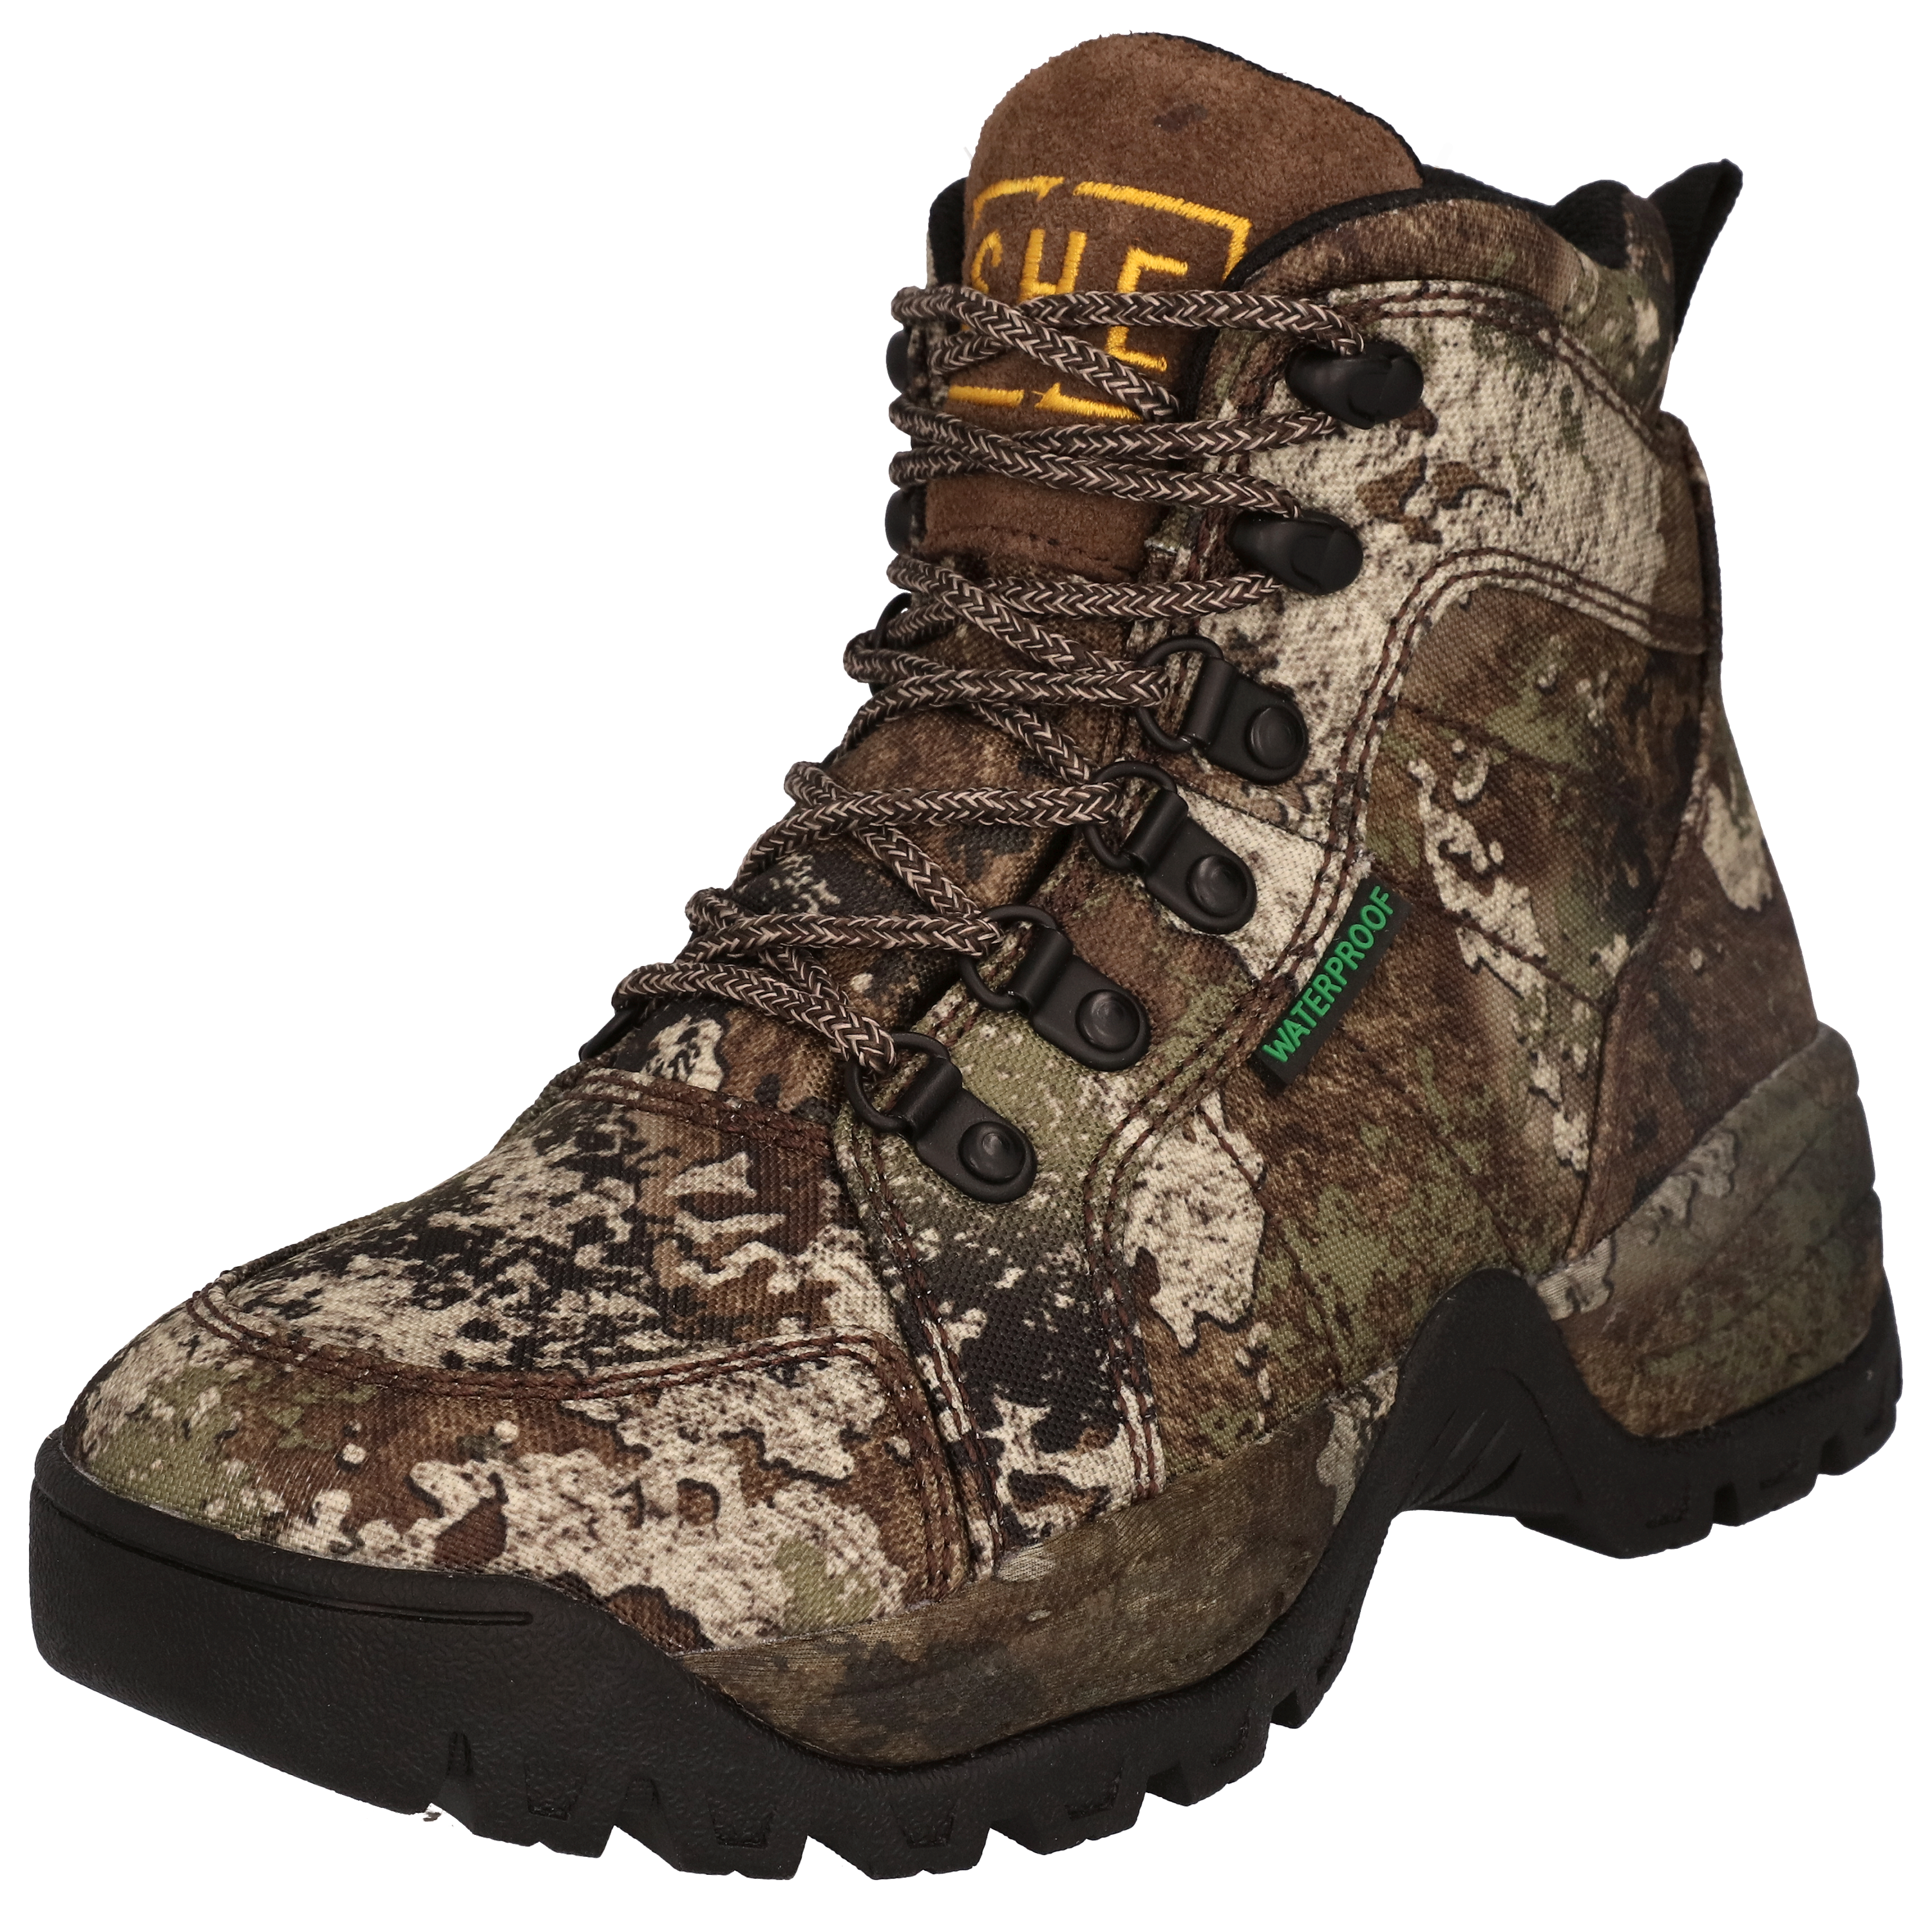 SHE Outdoor Timber Buck Waterproof Hunting Boots for Ladies - TrueTimber Strata - 8.5M